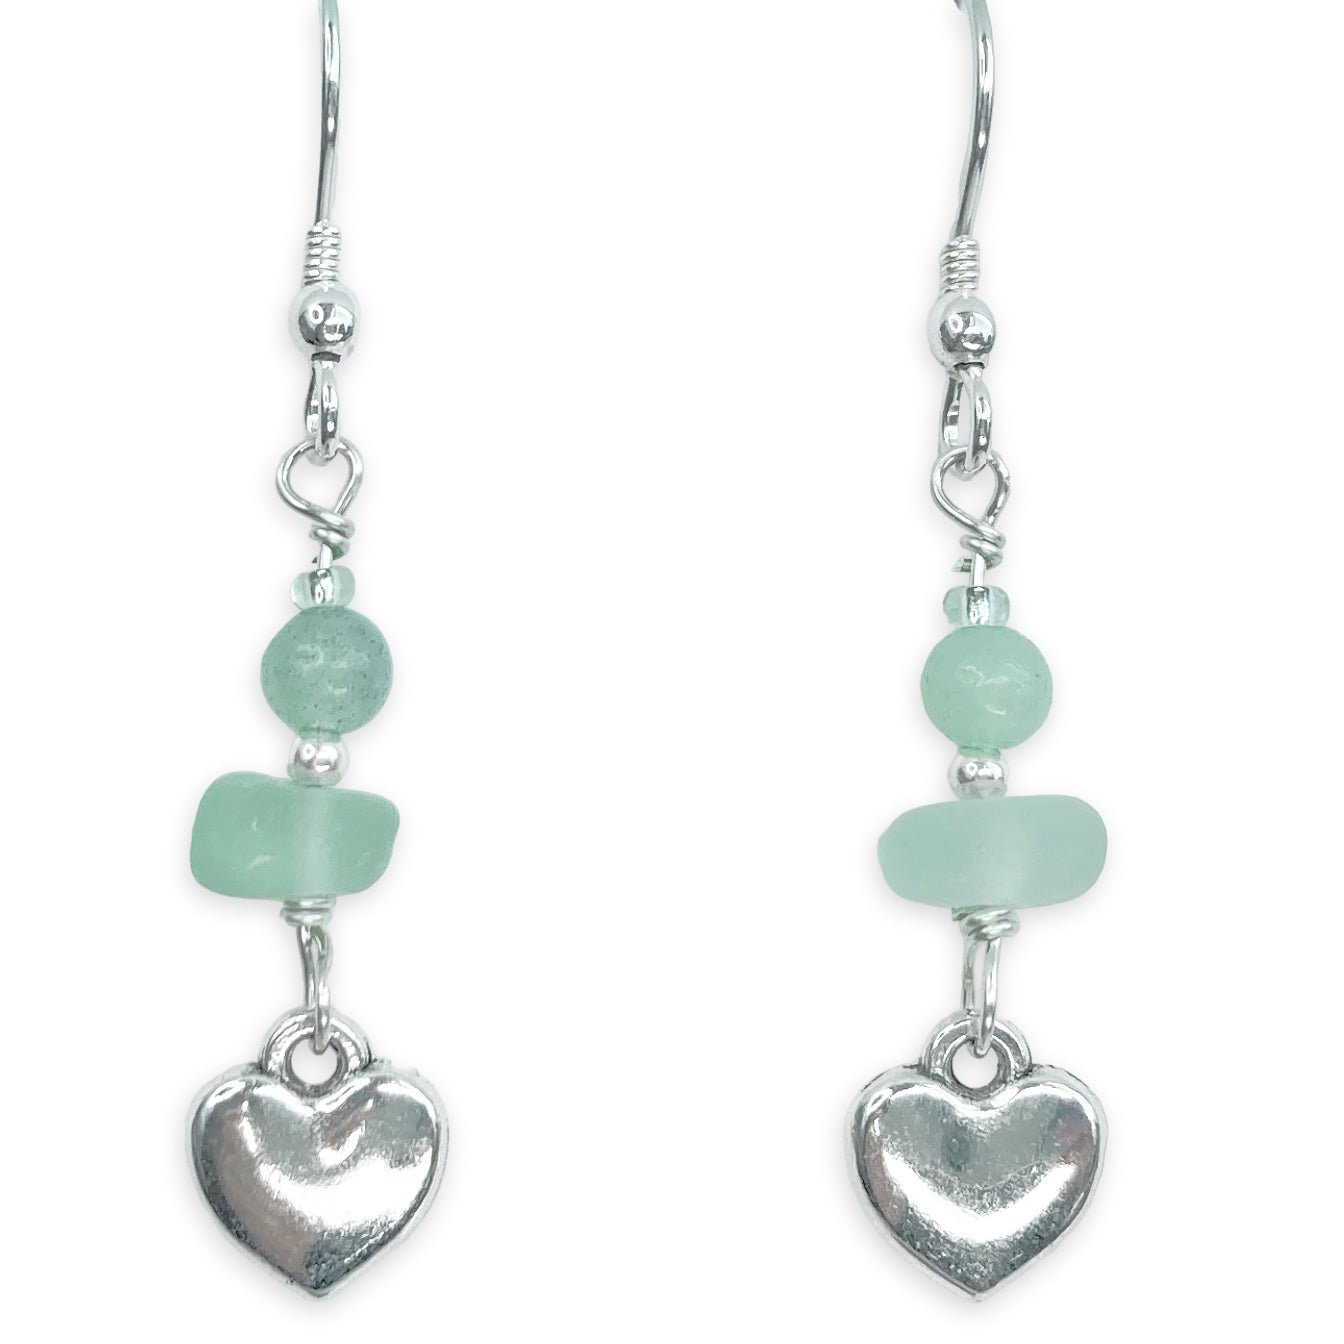 Heart Earrings - Green Sea Glass & Silver Jewellery with Amazonite Crystal Beads - East Neuk Beach Crafts